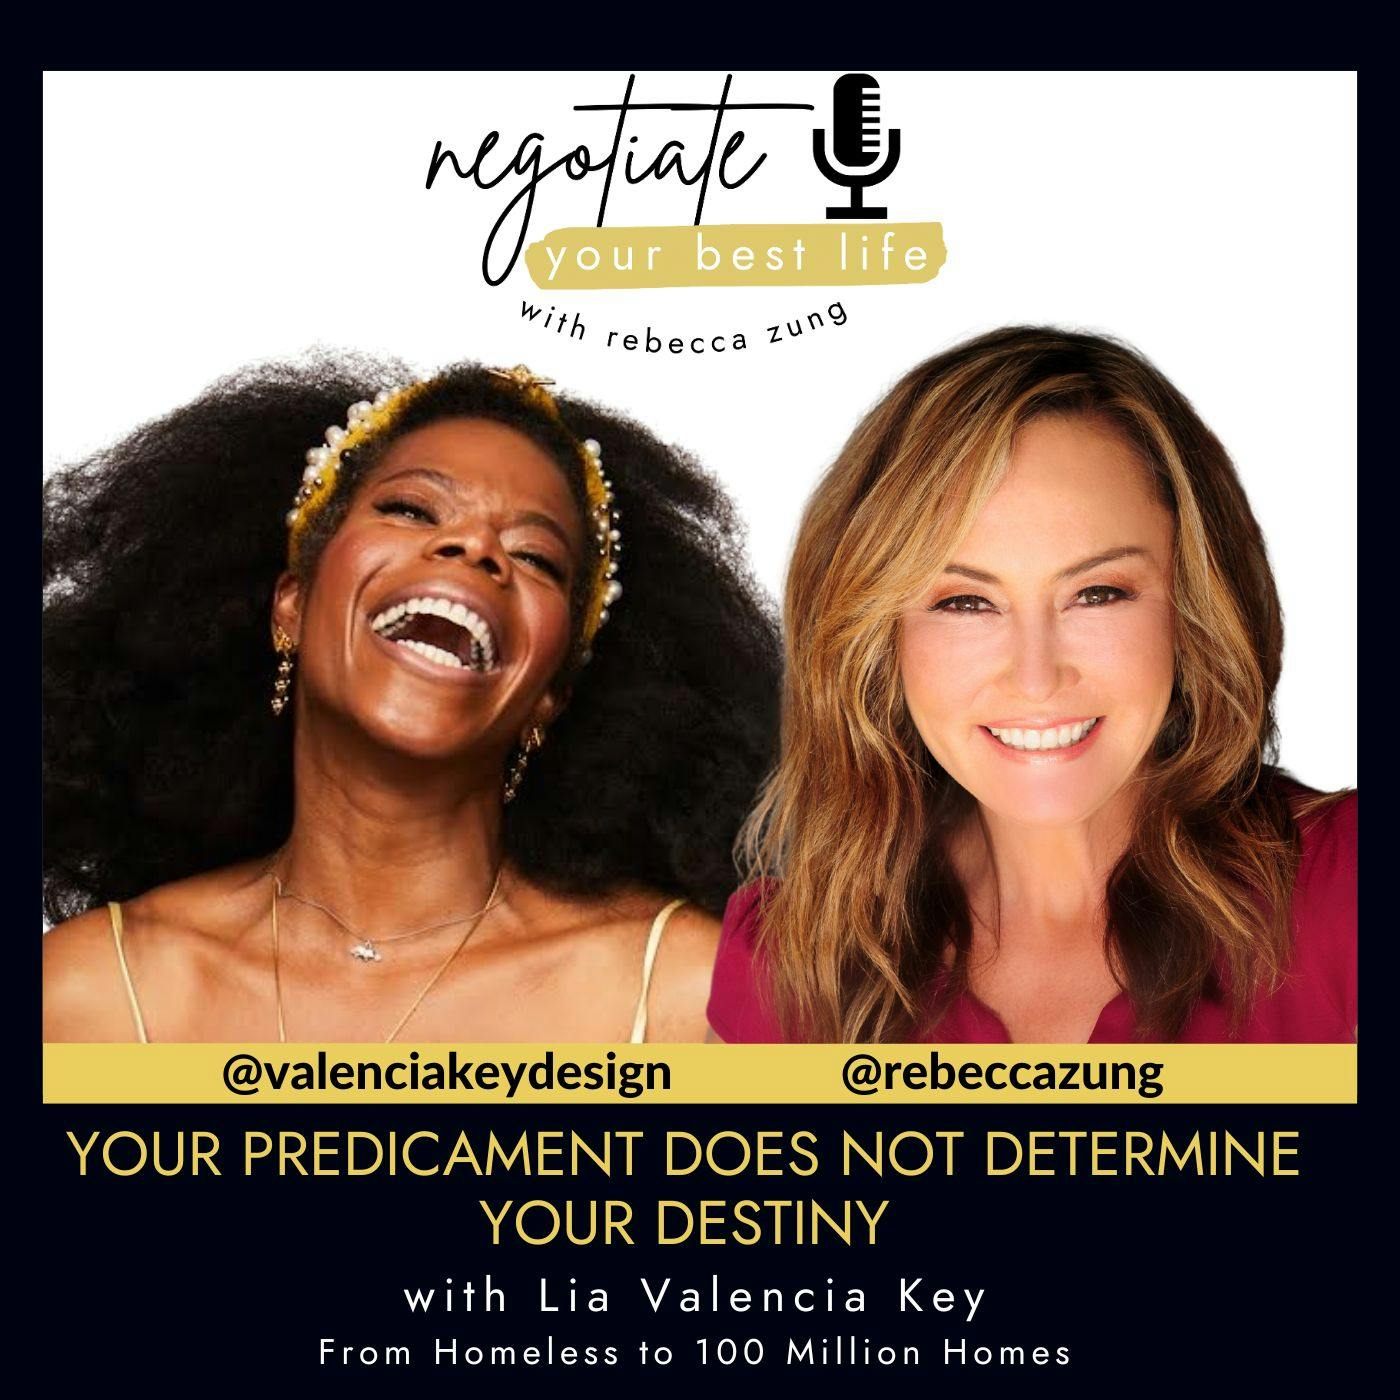 Your Predicament Does Not Determine Your Destiny with Guest LIA VALENCIA KEY  & Rebecca Zung on Negotiate Your Best Life #510